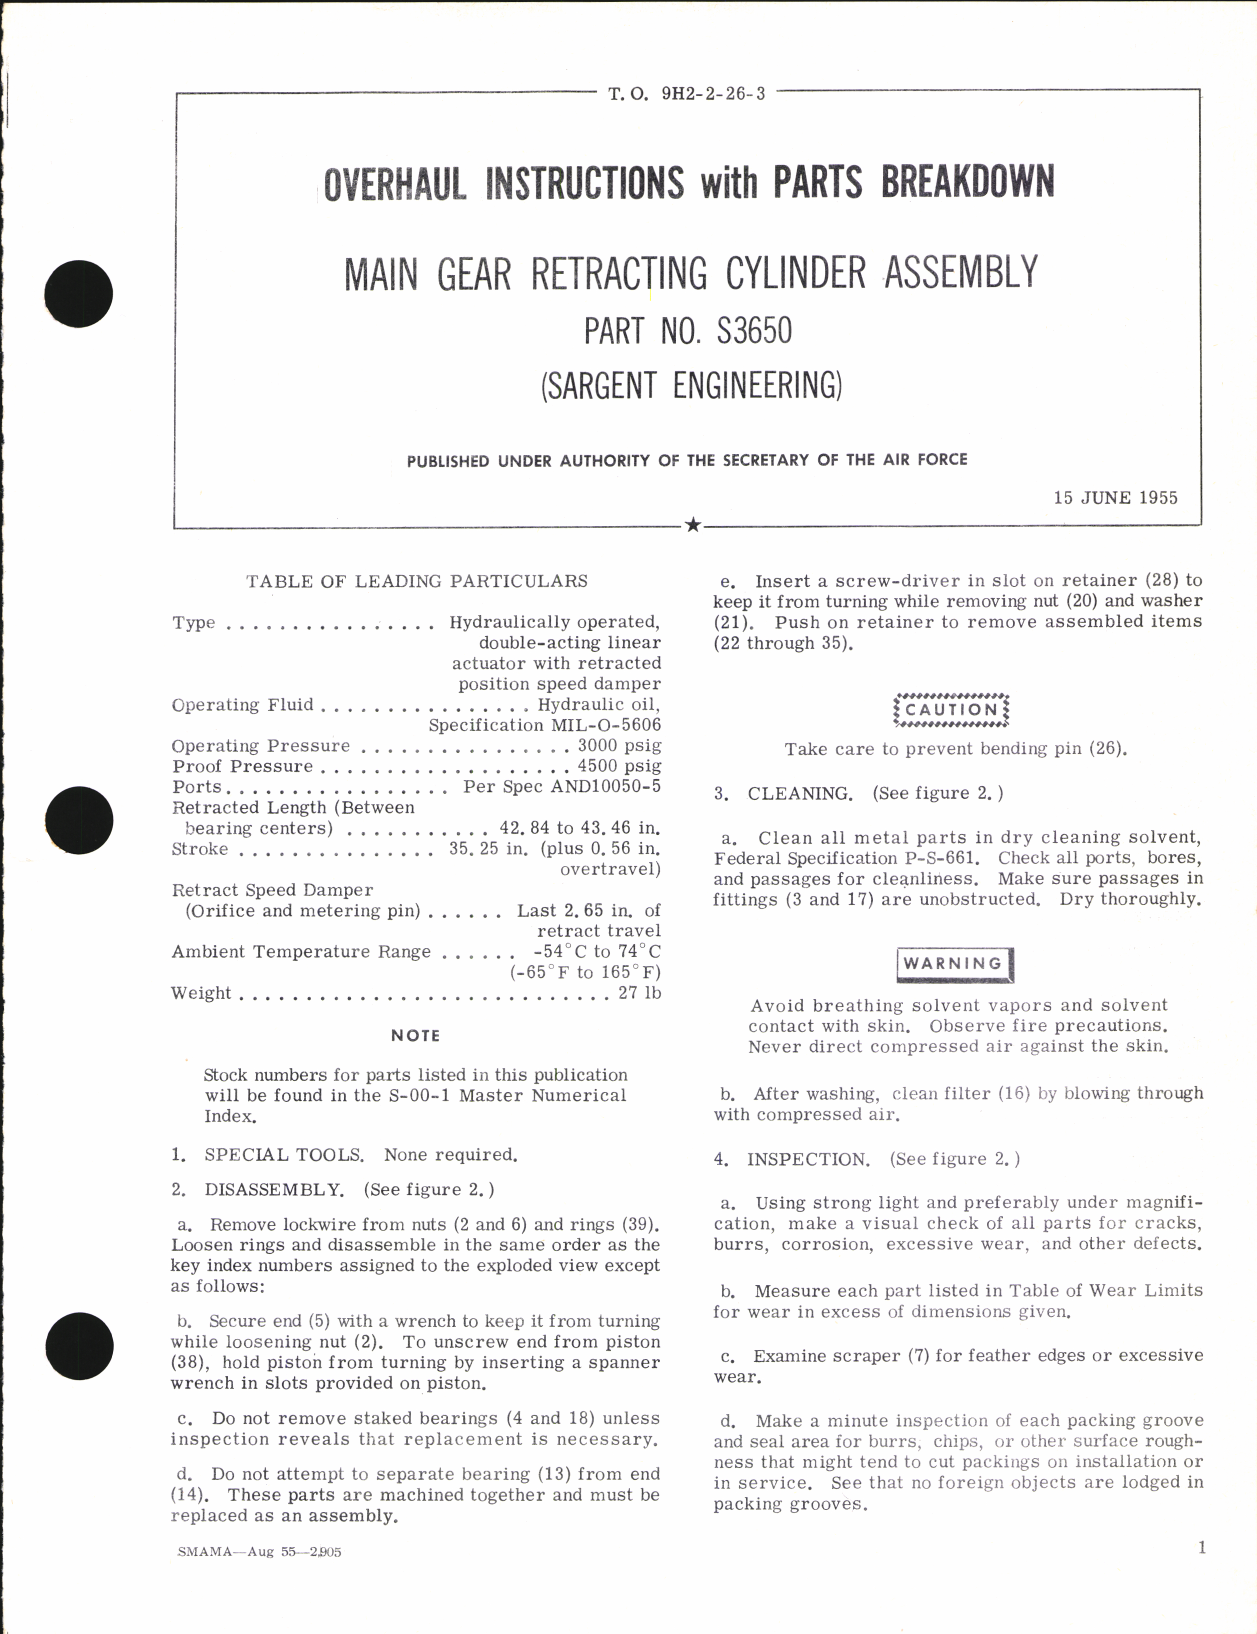 Sample page 1 from AirCorps Library document: Overhaul Instructions with Parts Breakdown for Main Gear Retracting Cylinder Assembly Part No. S3650